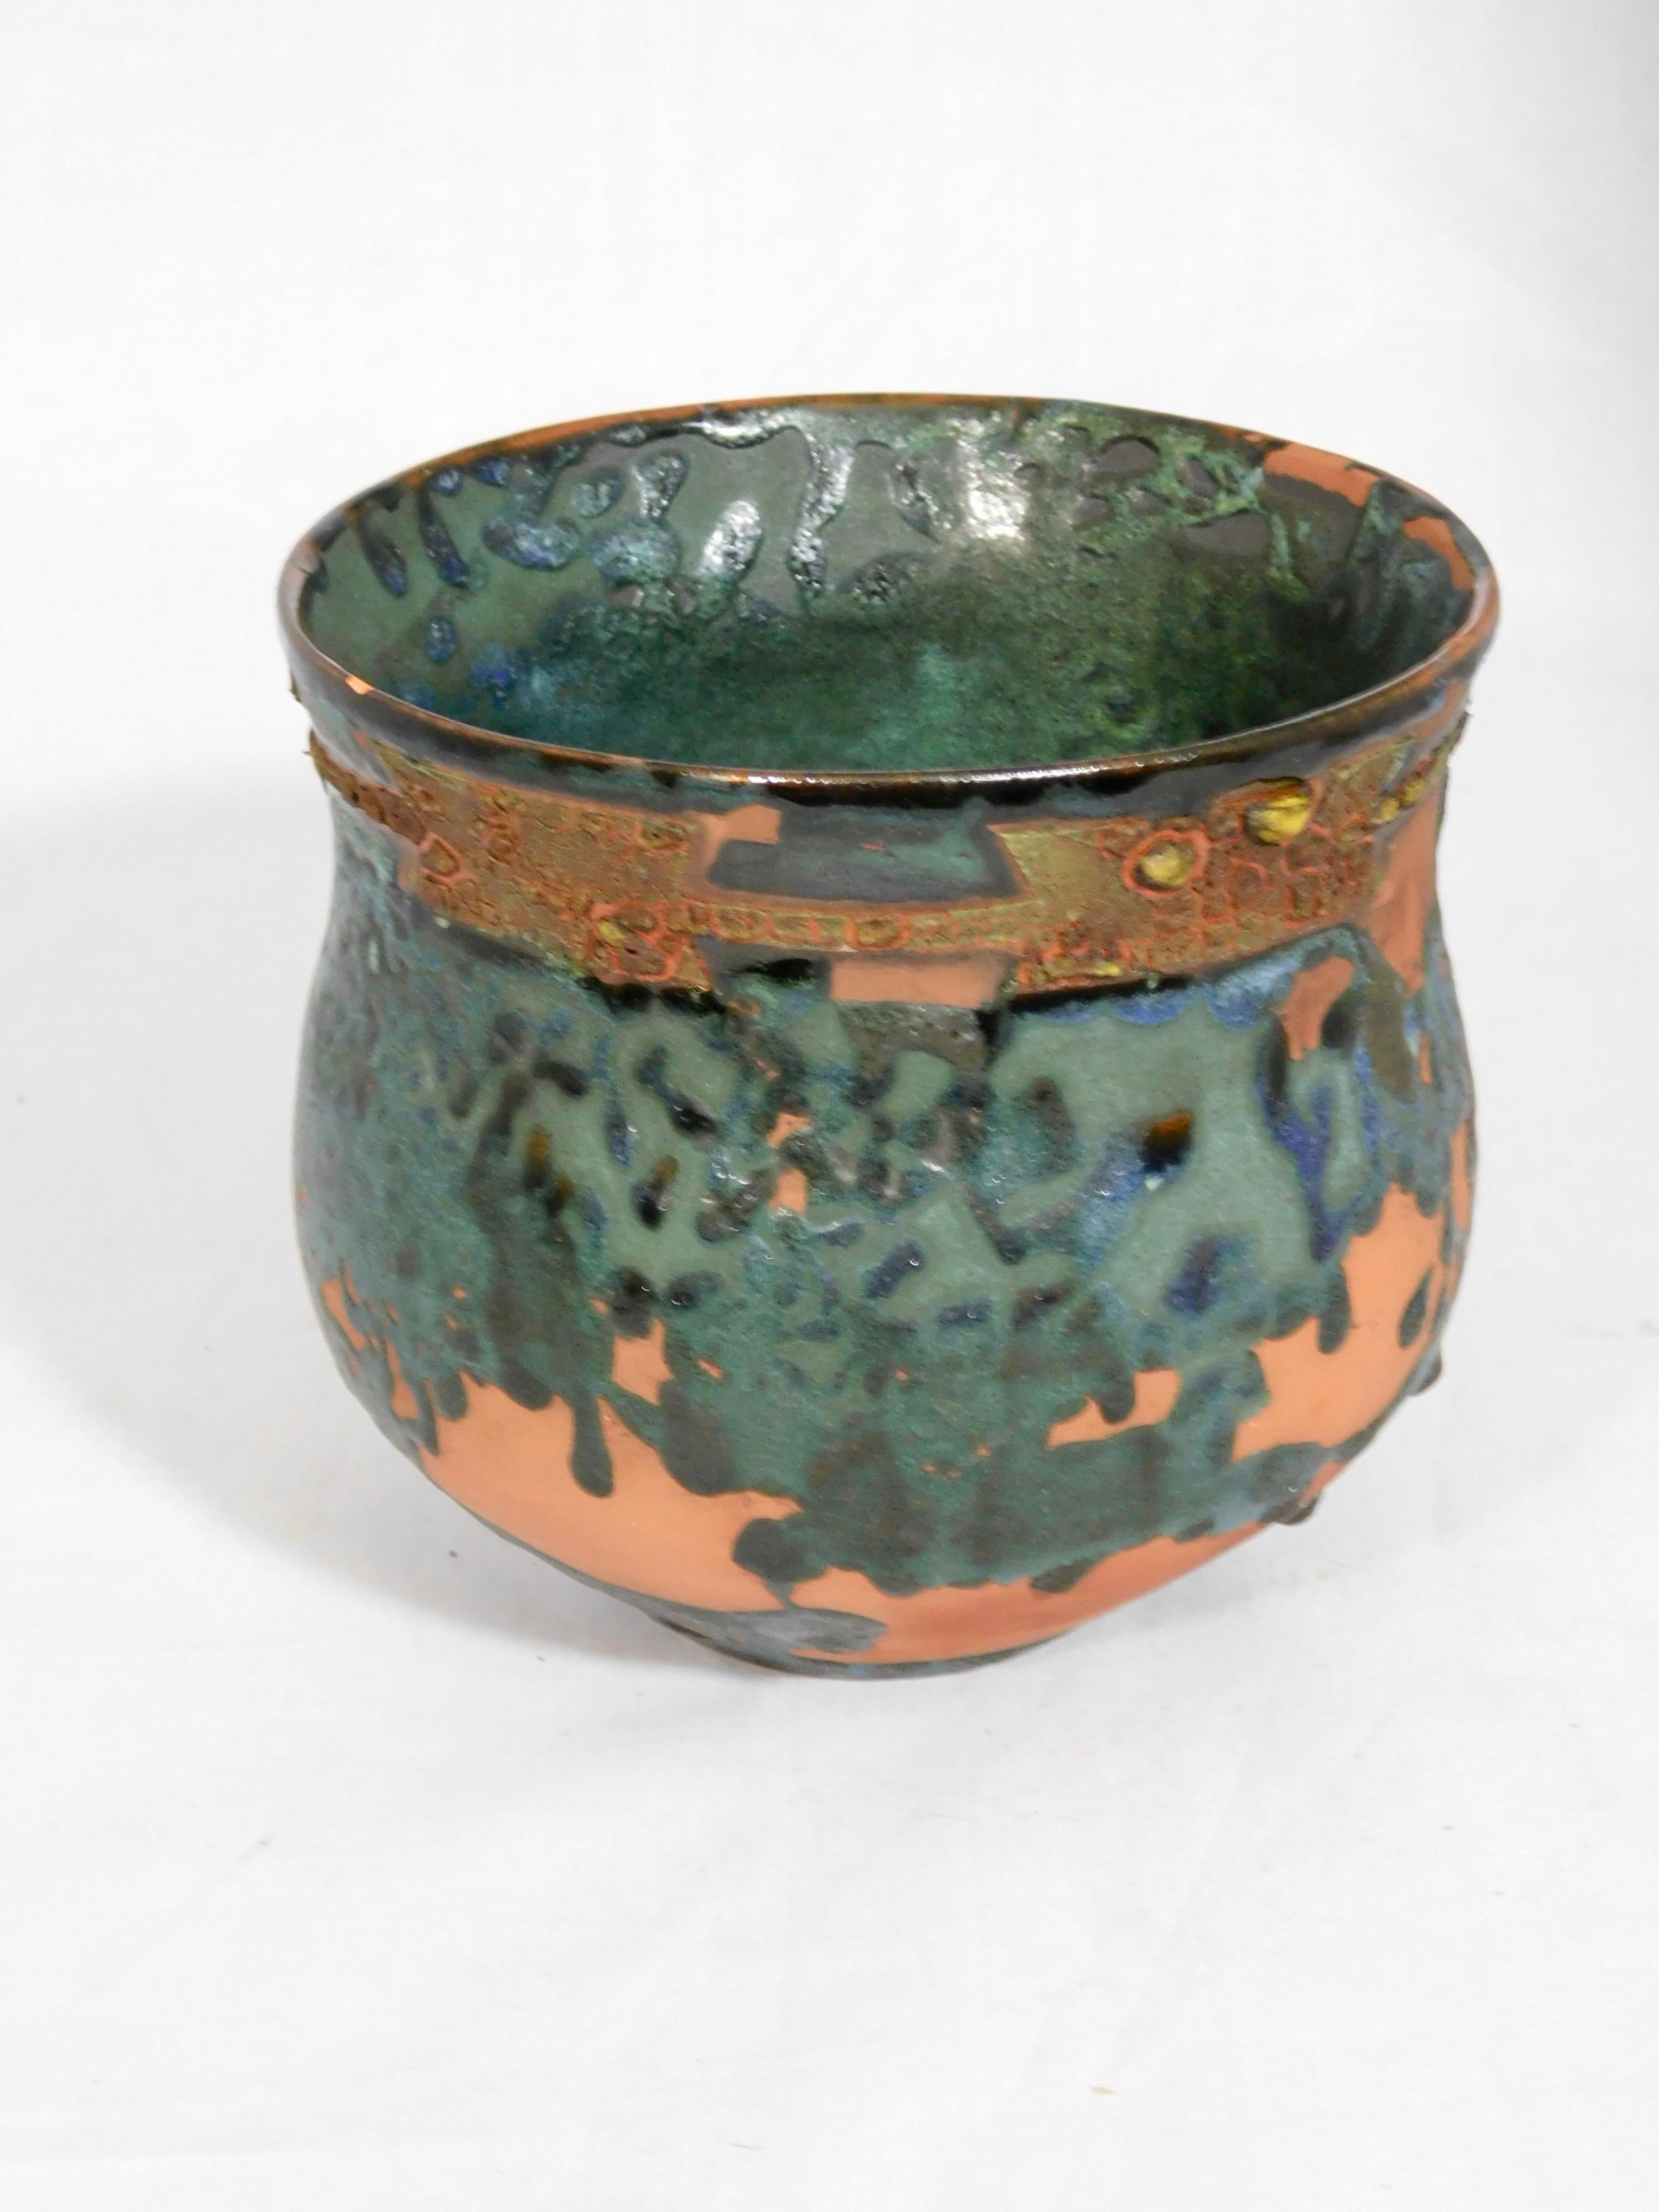 Wheel thrown El Monte earthenware vessel by ceramicist Andrew Wilder. This is a one of a kind object made in the ancient way- by hand in a small artisanal pottery. In this series Wilder explores the application of lichen under glazes to achieve